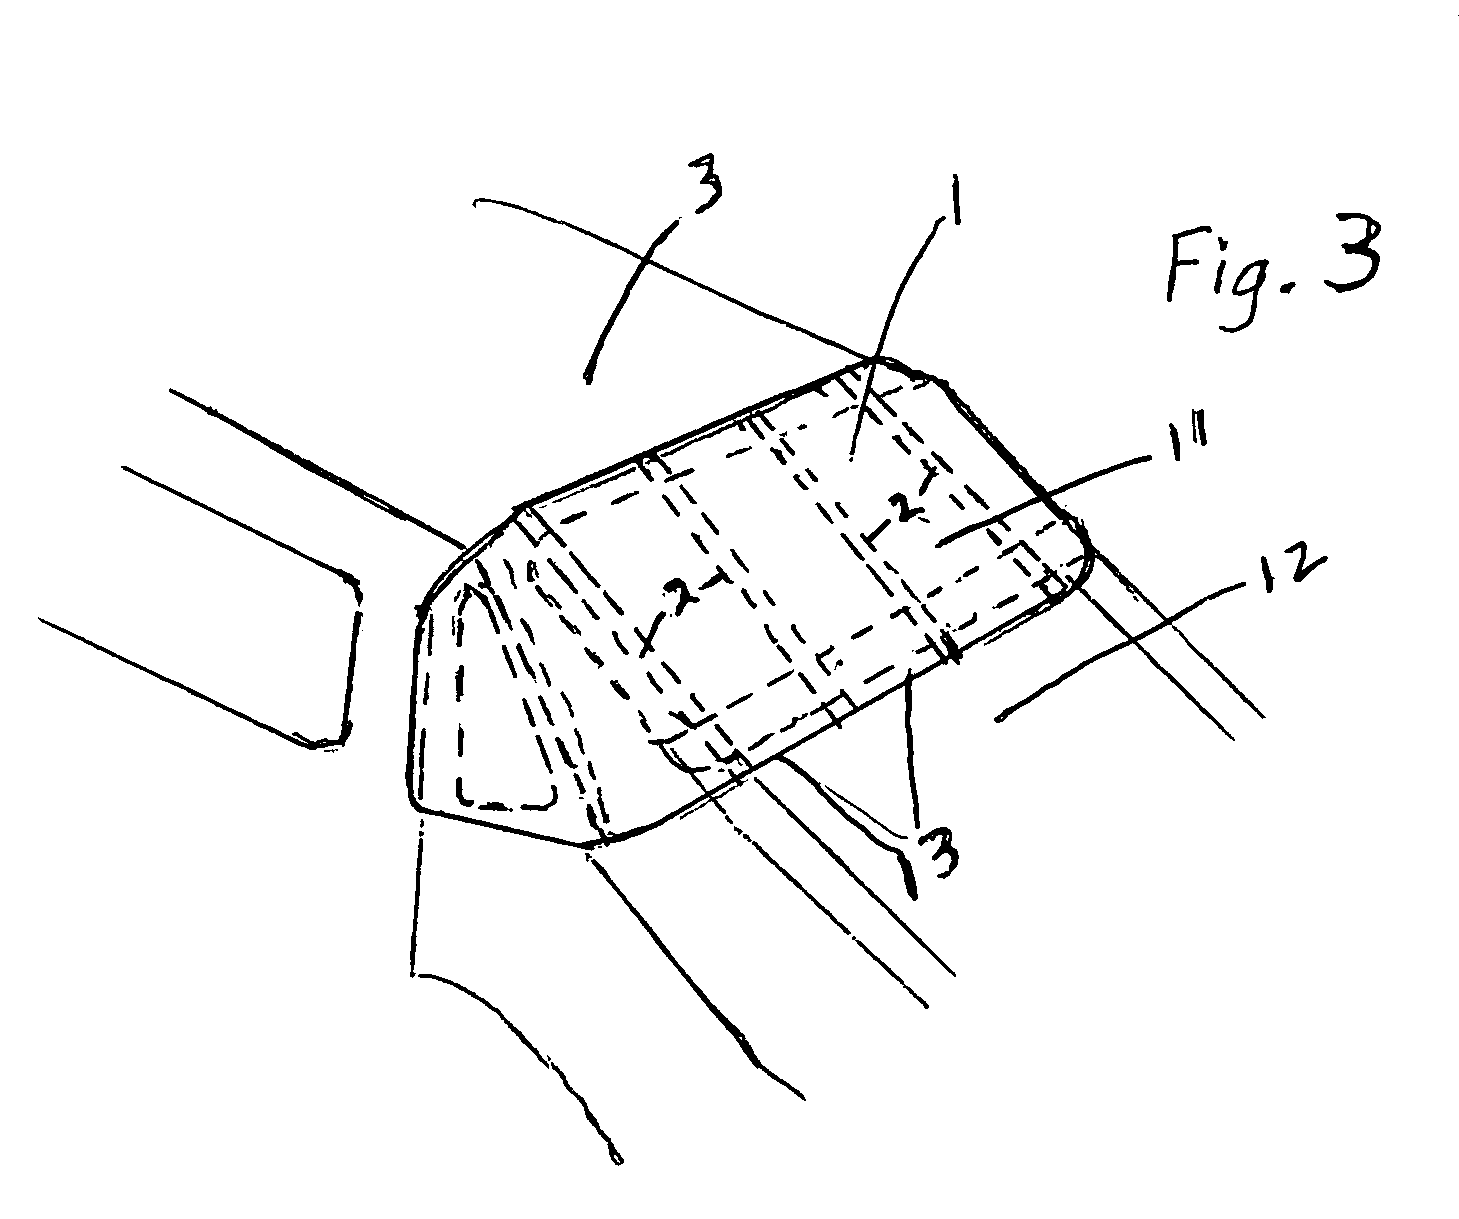 Cover for windshields, windshield wipers, and air intake manifolds